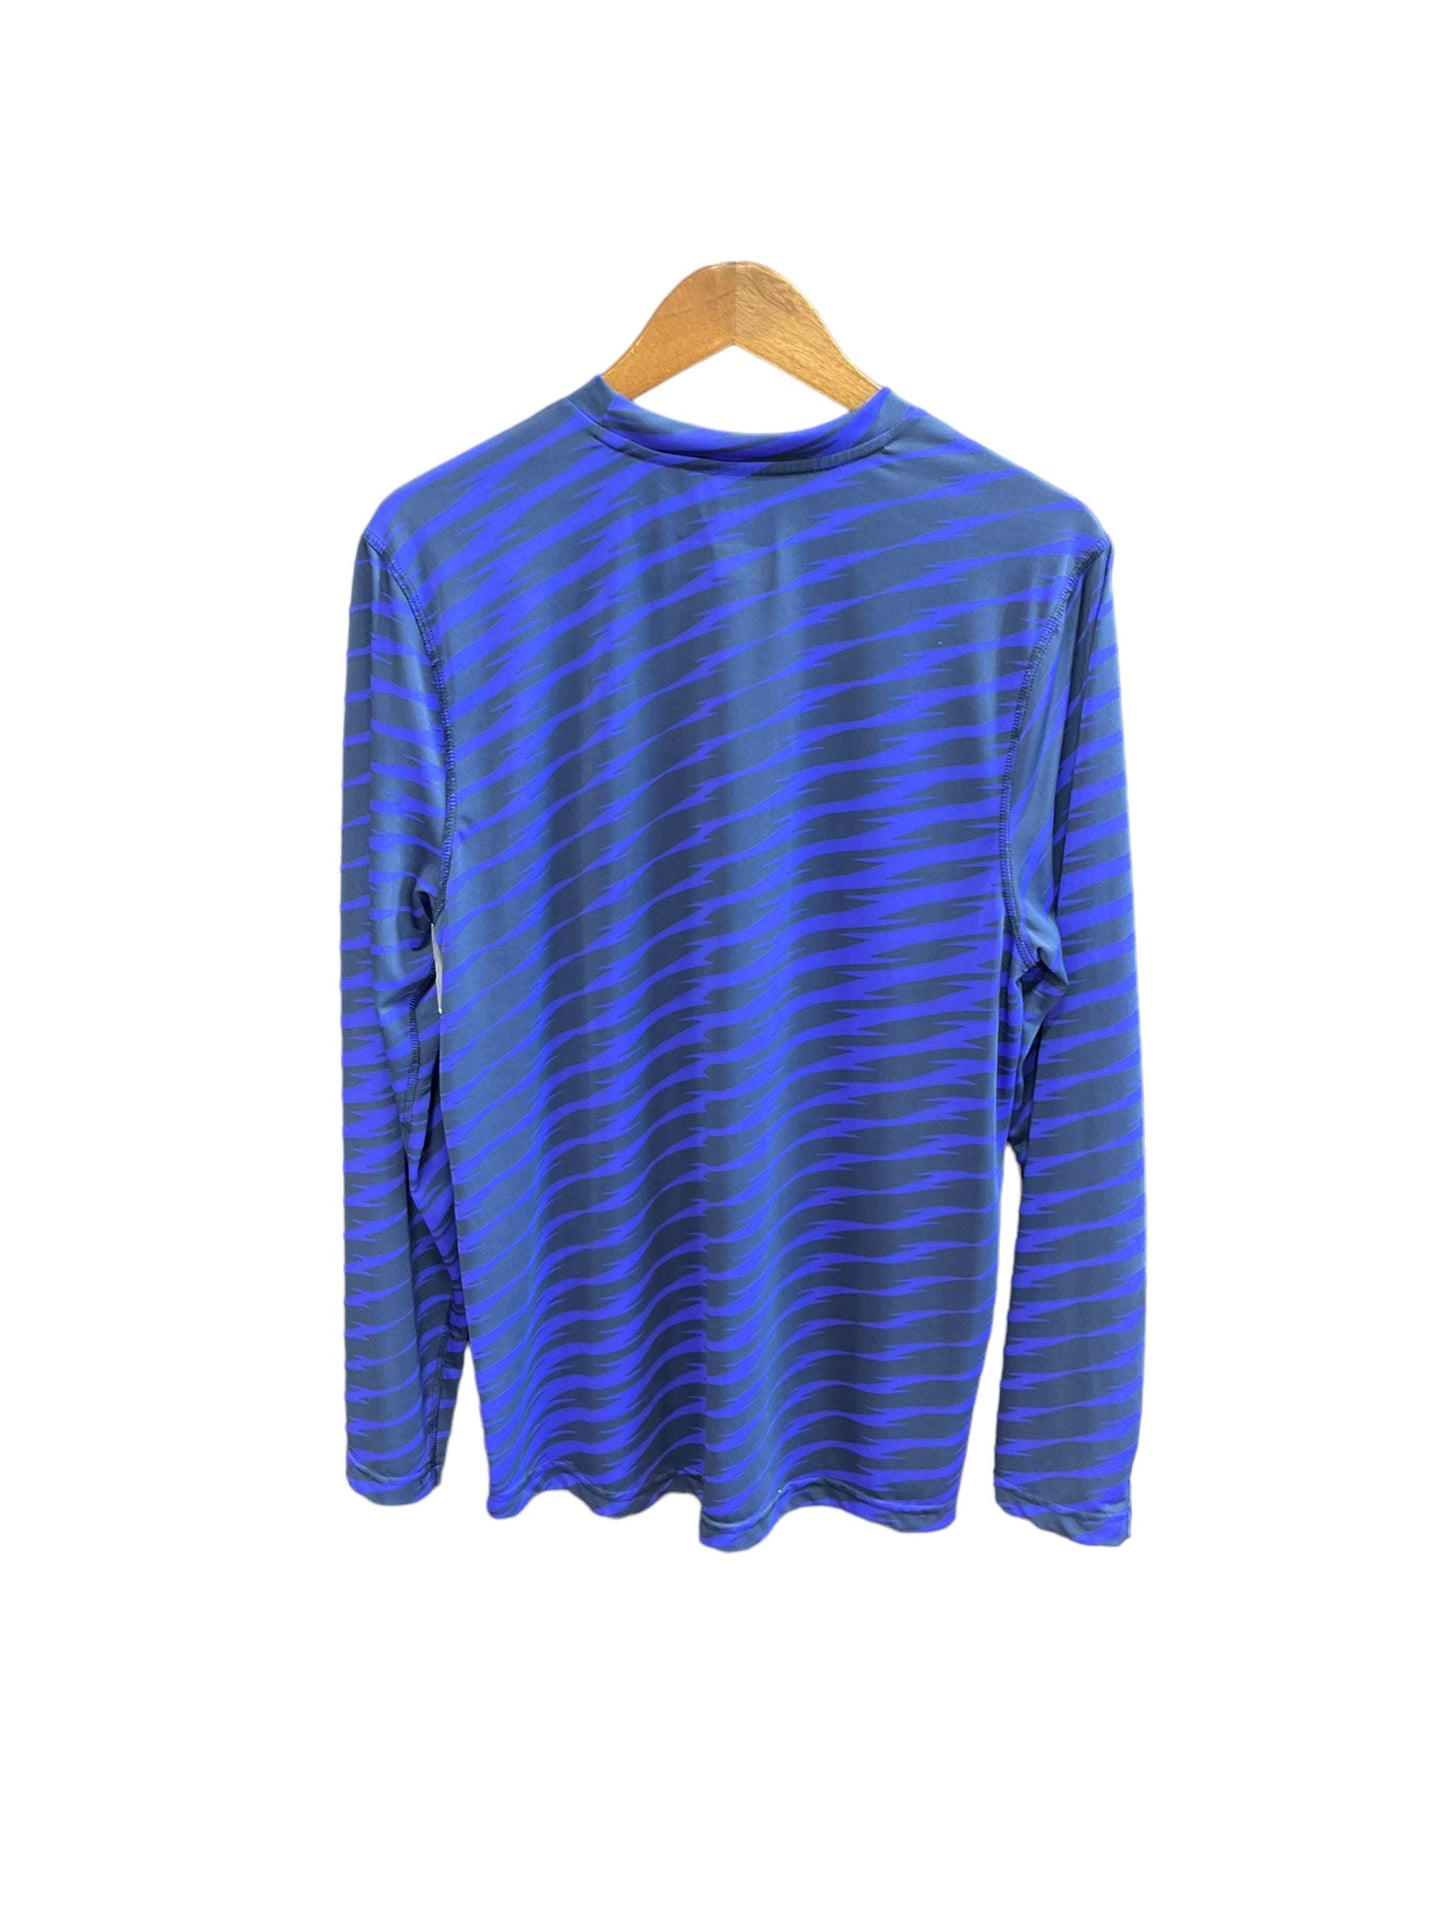 Athletic Top Long Sleeve Crewneck By Adidas  Size: L